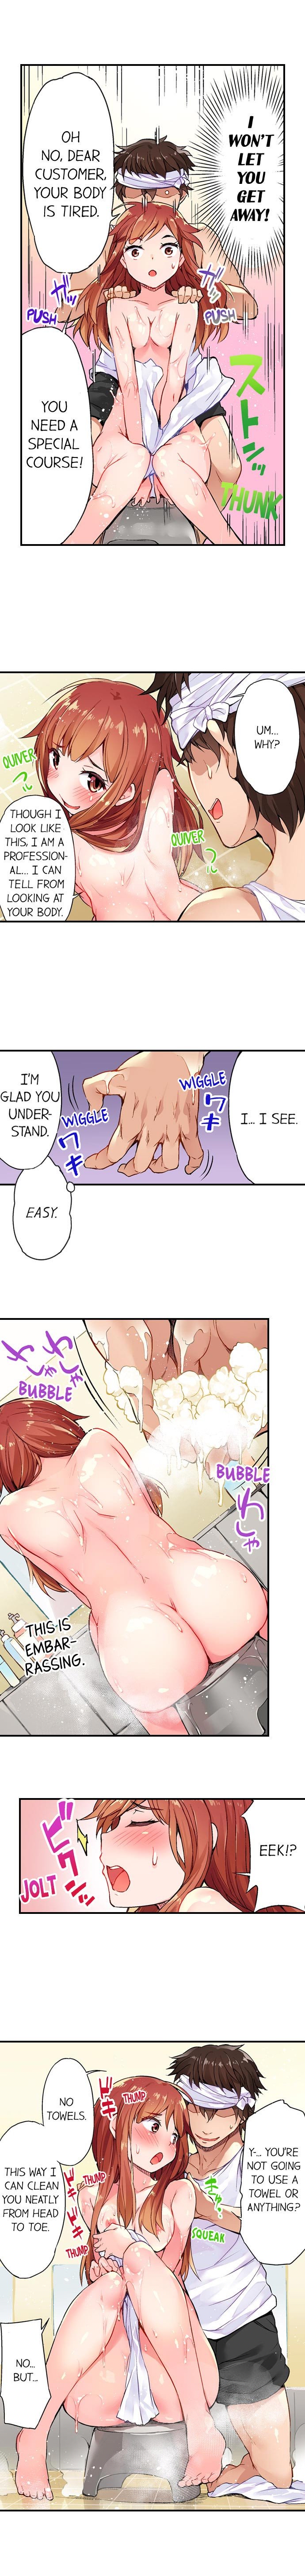 The Job of Washing That Part Ch.2